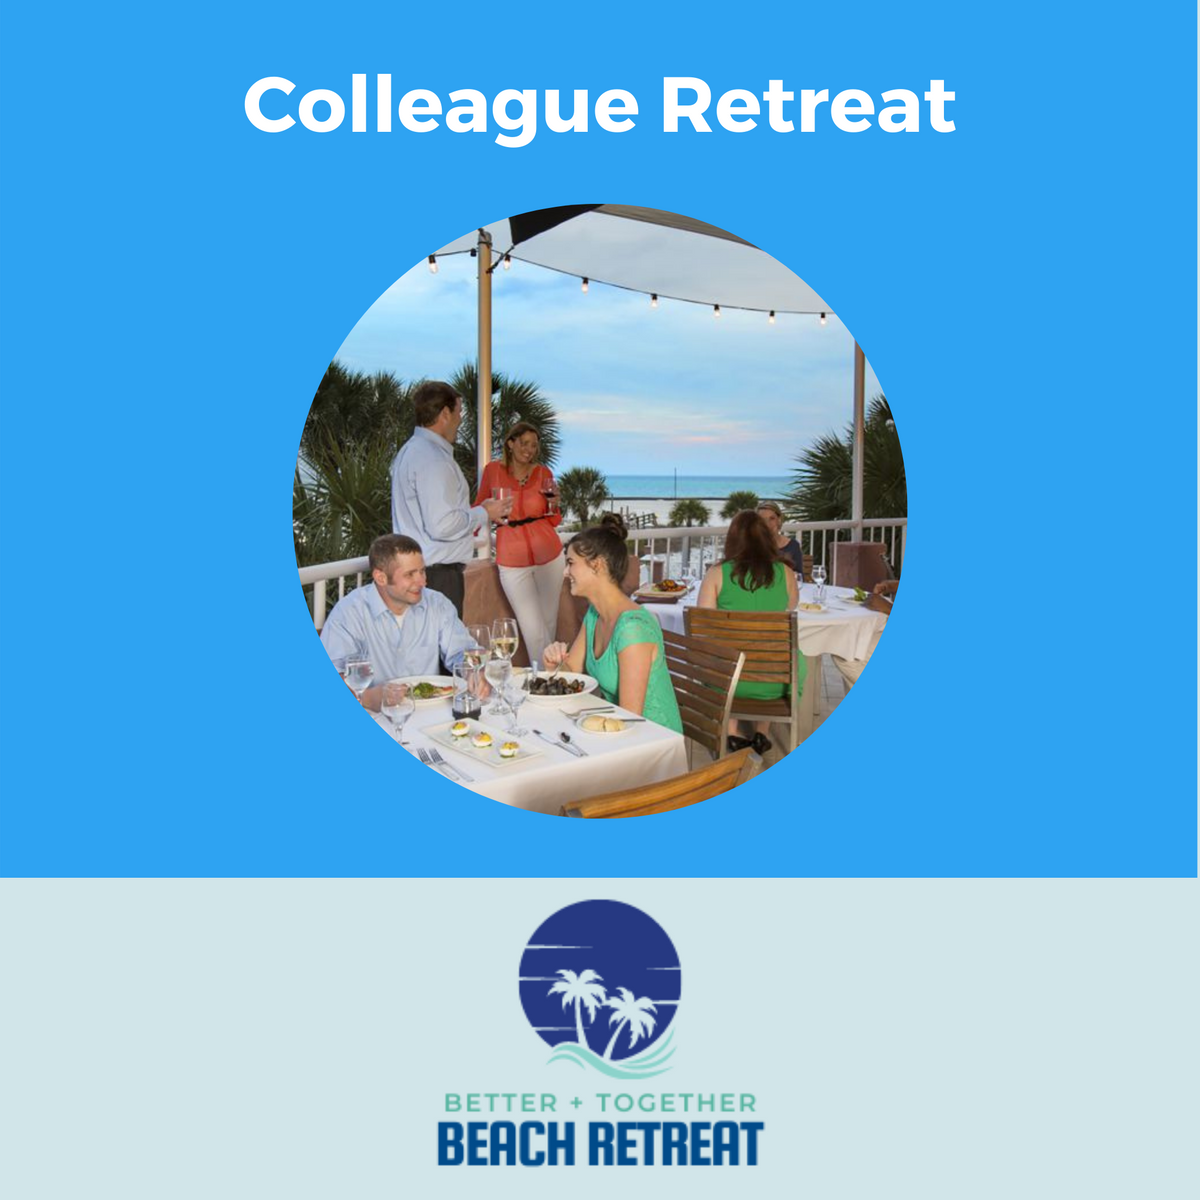 Colleague Retreat Package